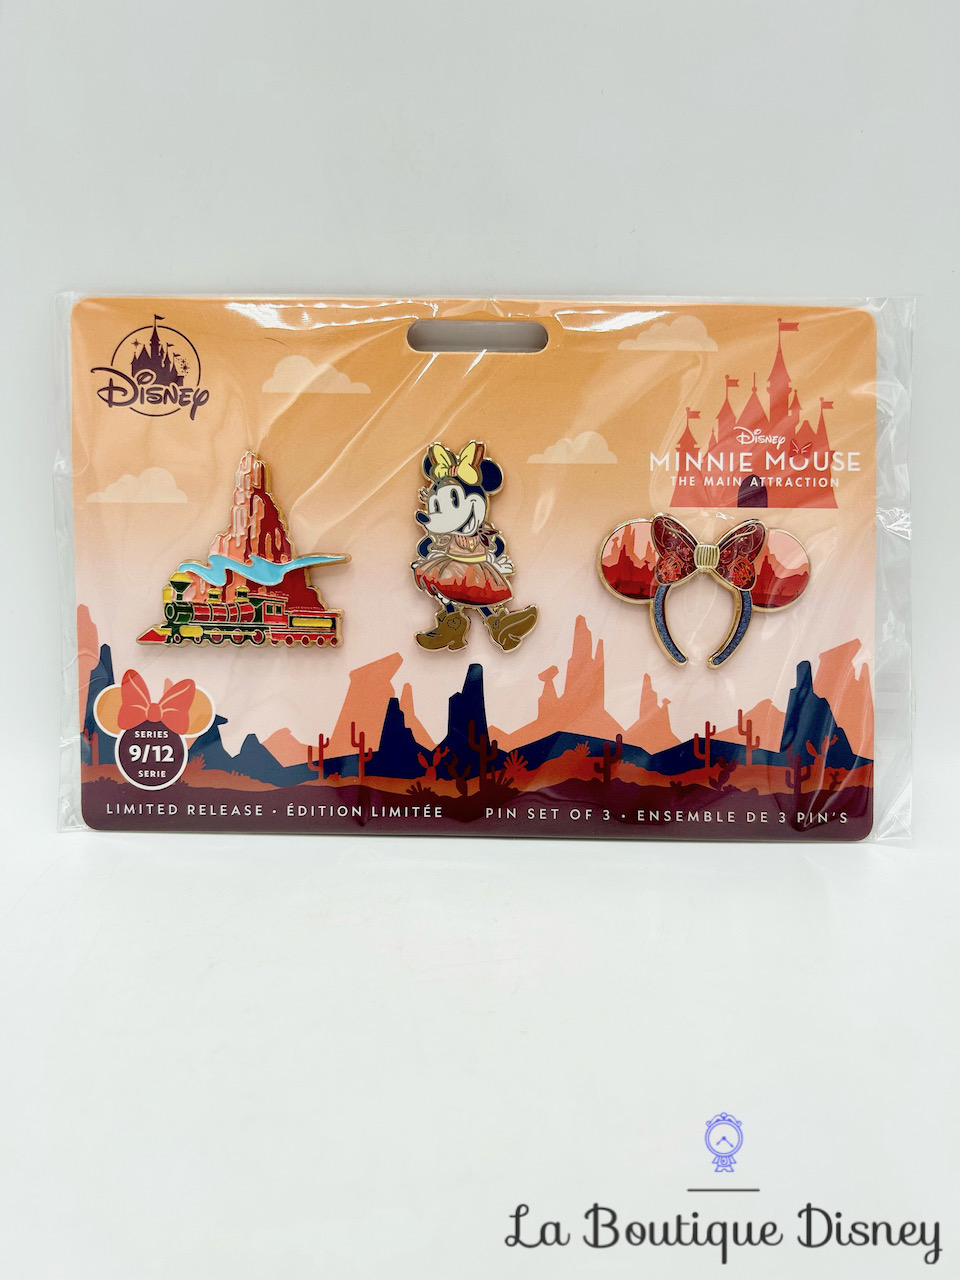 Pin Minnie Mouse The Main Attraction Big Thunder Mountain Series 9/12 Édition Limitée Disney Store 2020 140458